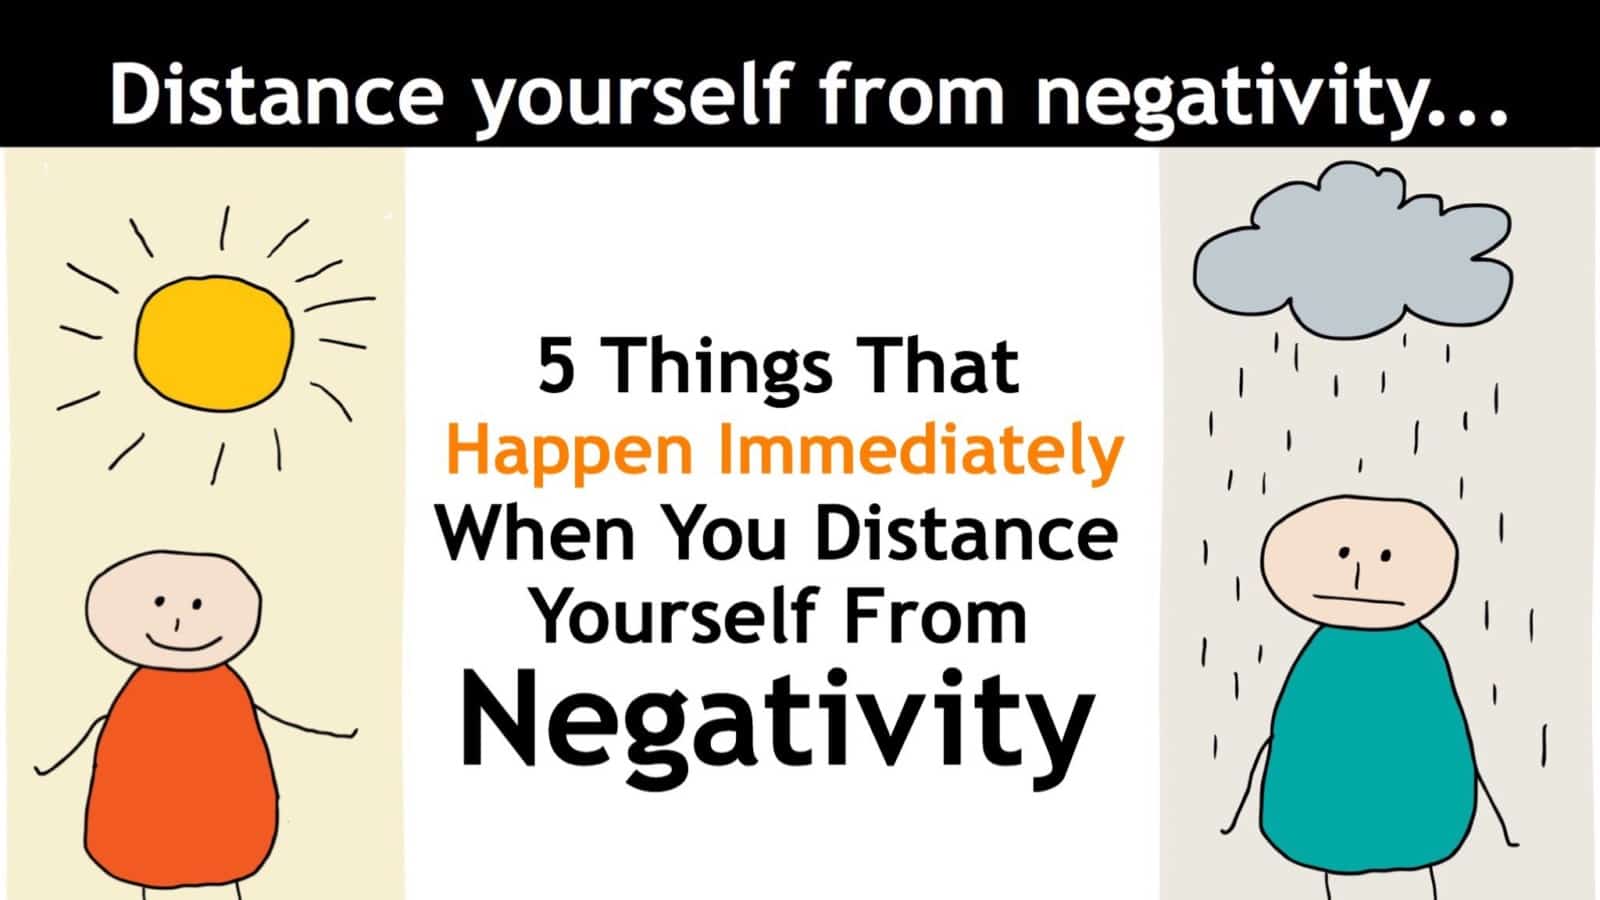 5 Positive Things That Immediately Happen When You Distance Yourself From Negativity